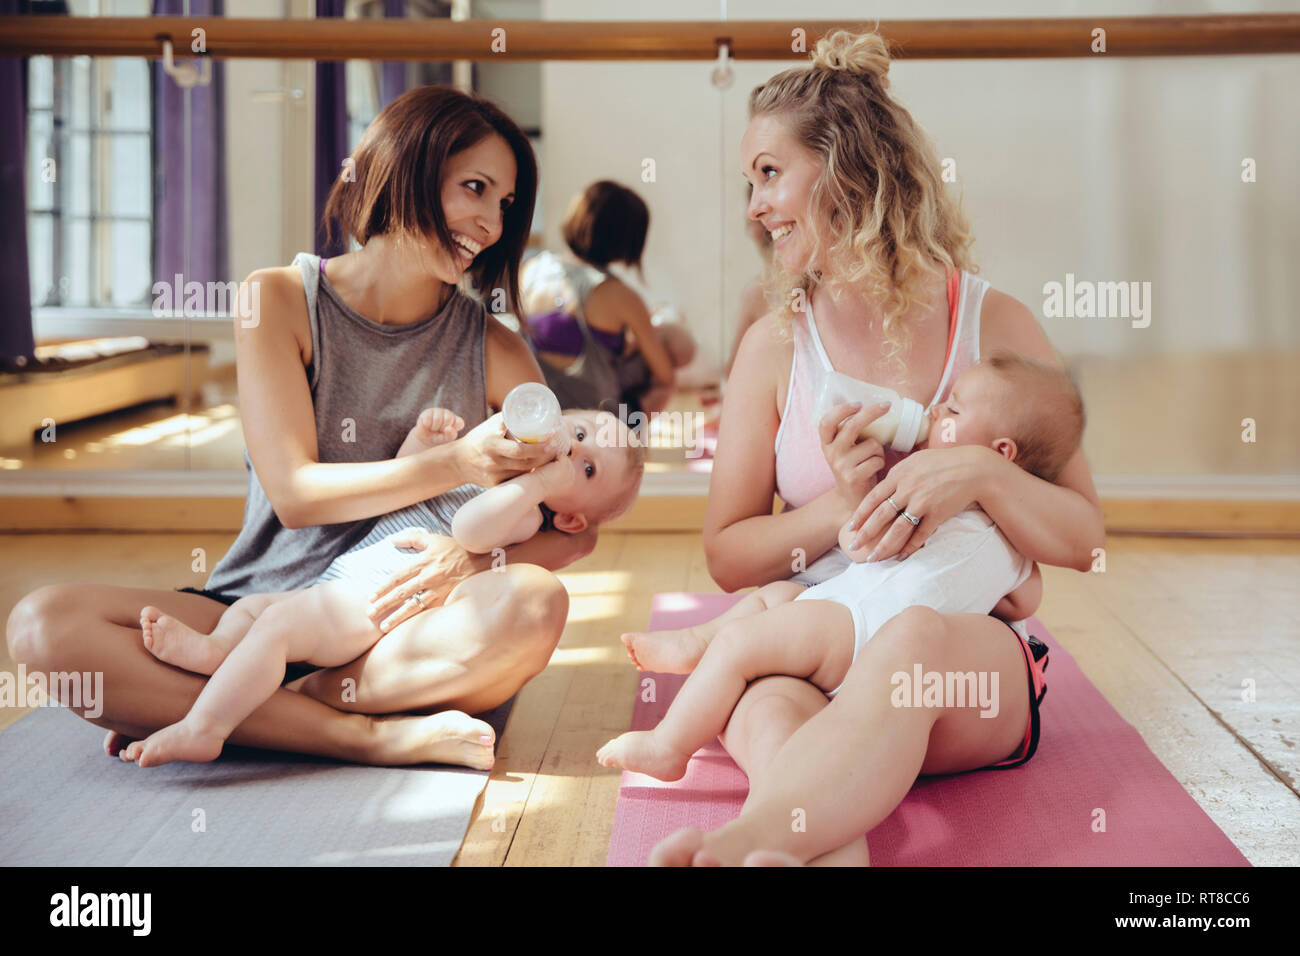 Two mothers bottle-feeding their babies in exercise room Stock Photo